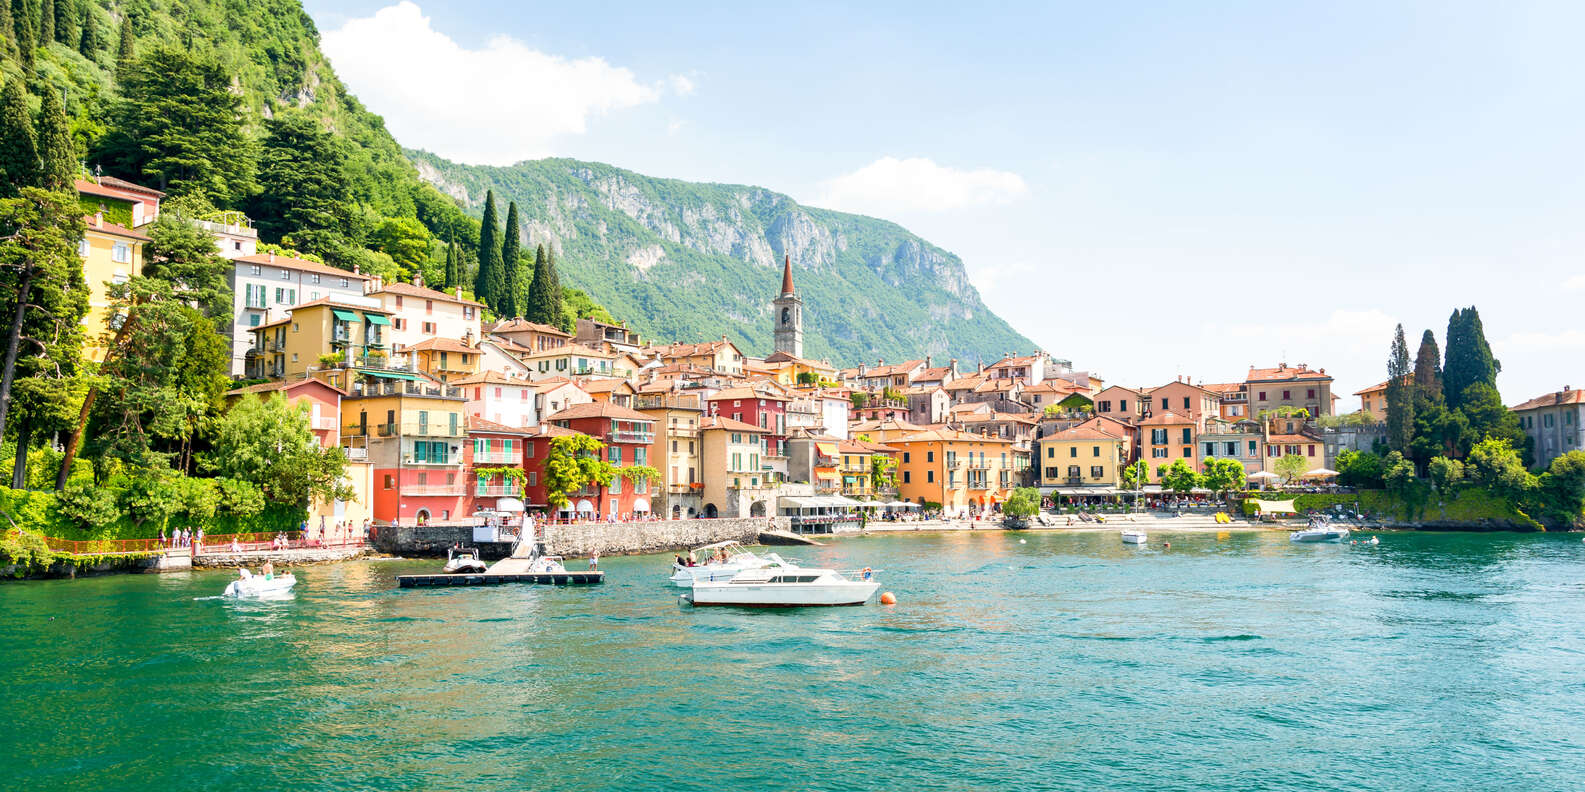 What to do in Varenna